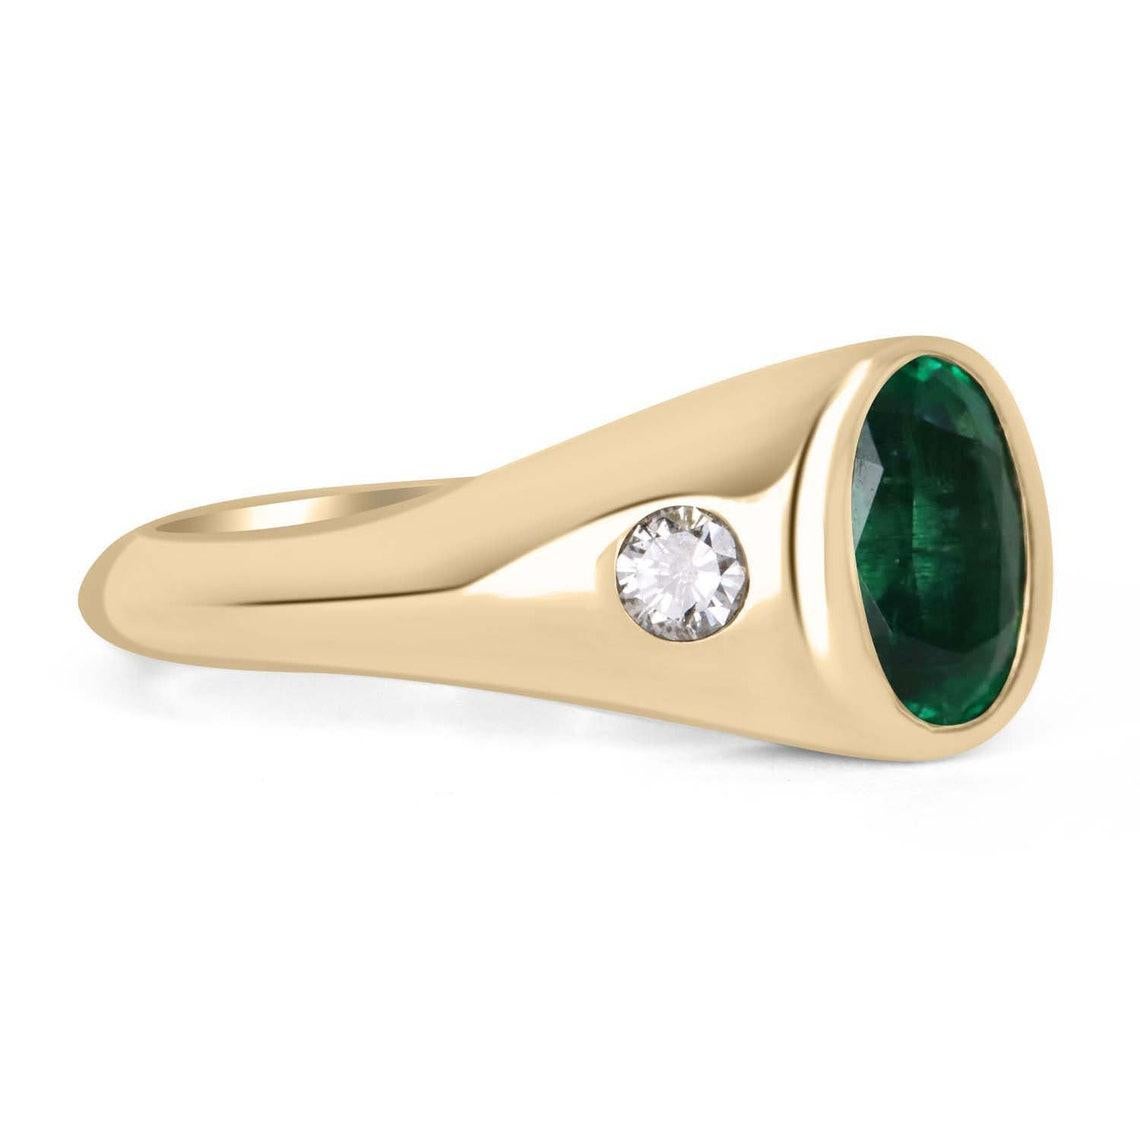 Displayed is a classic Top vivid green emerald & diamond three stone men's ring in 14K yellow gold. This solitaire ring carries an emerald in a secure bezel setting. Fully faceted, this gemstone showcases excellent shine and brilliance. The emerald